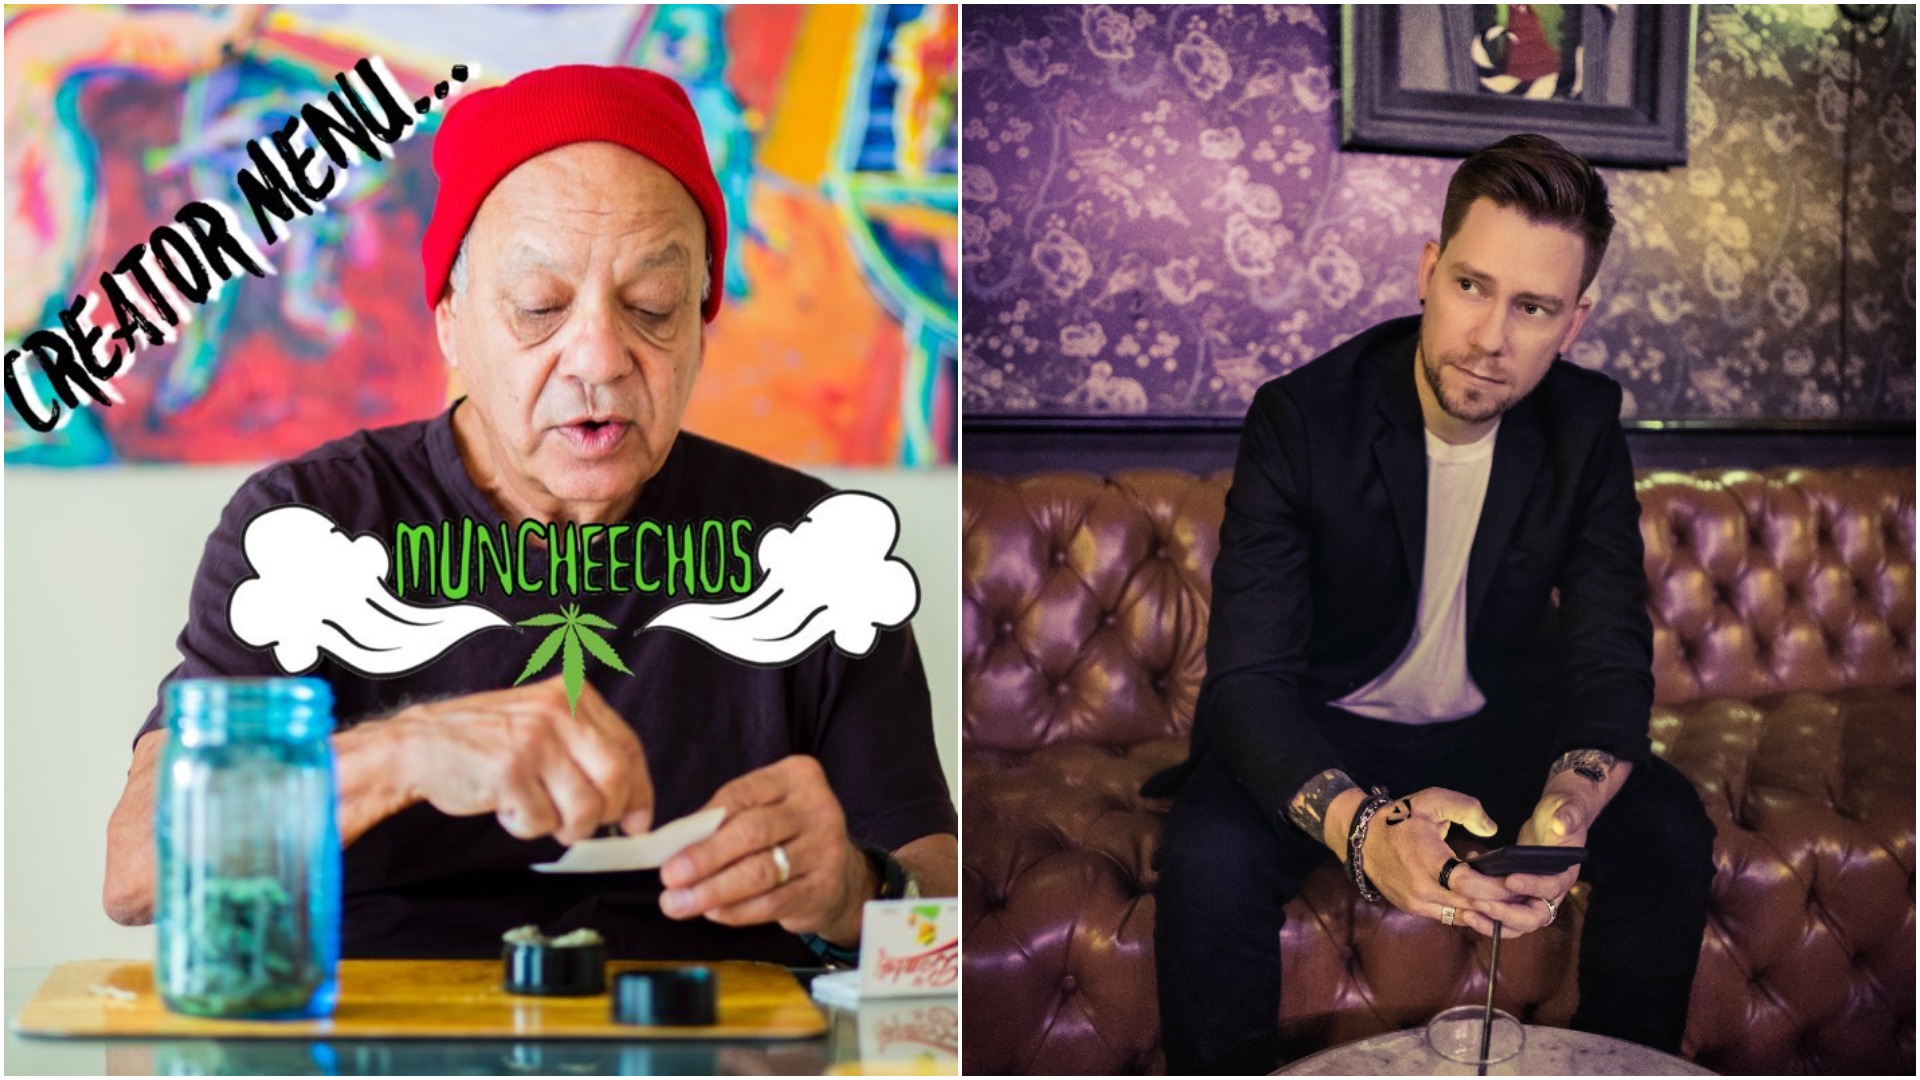 Cheech Marin rolls a joint and chef Zach Neil holds his phone while sitting in a club 